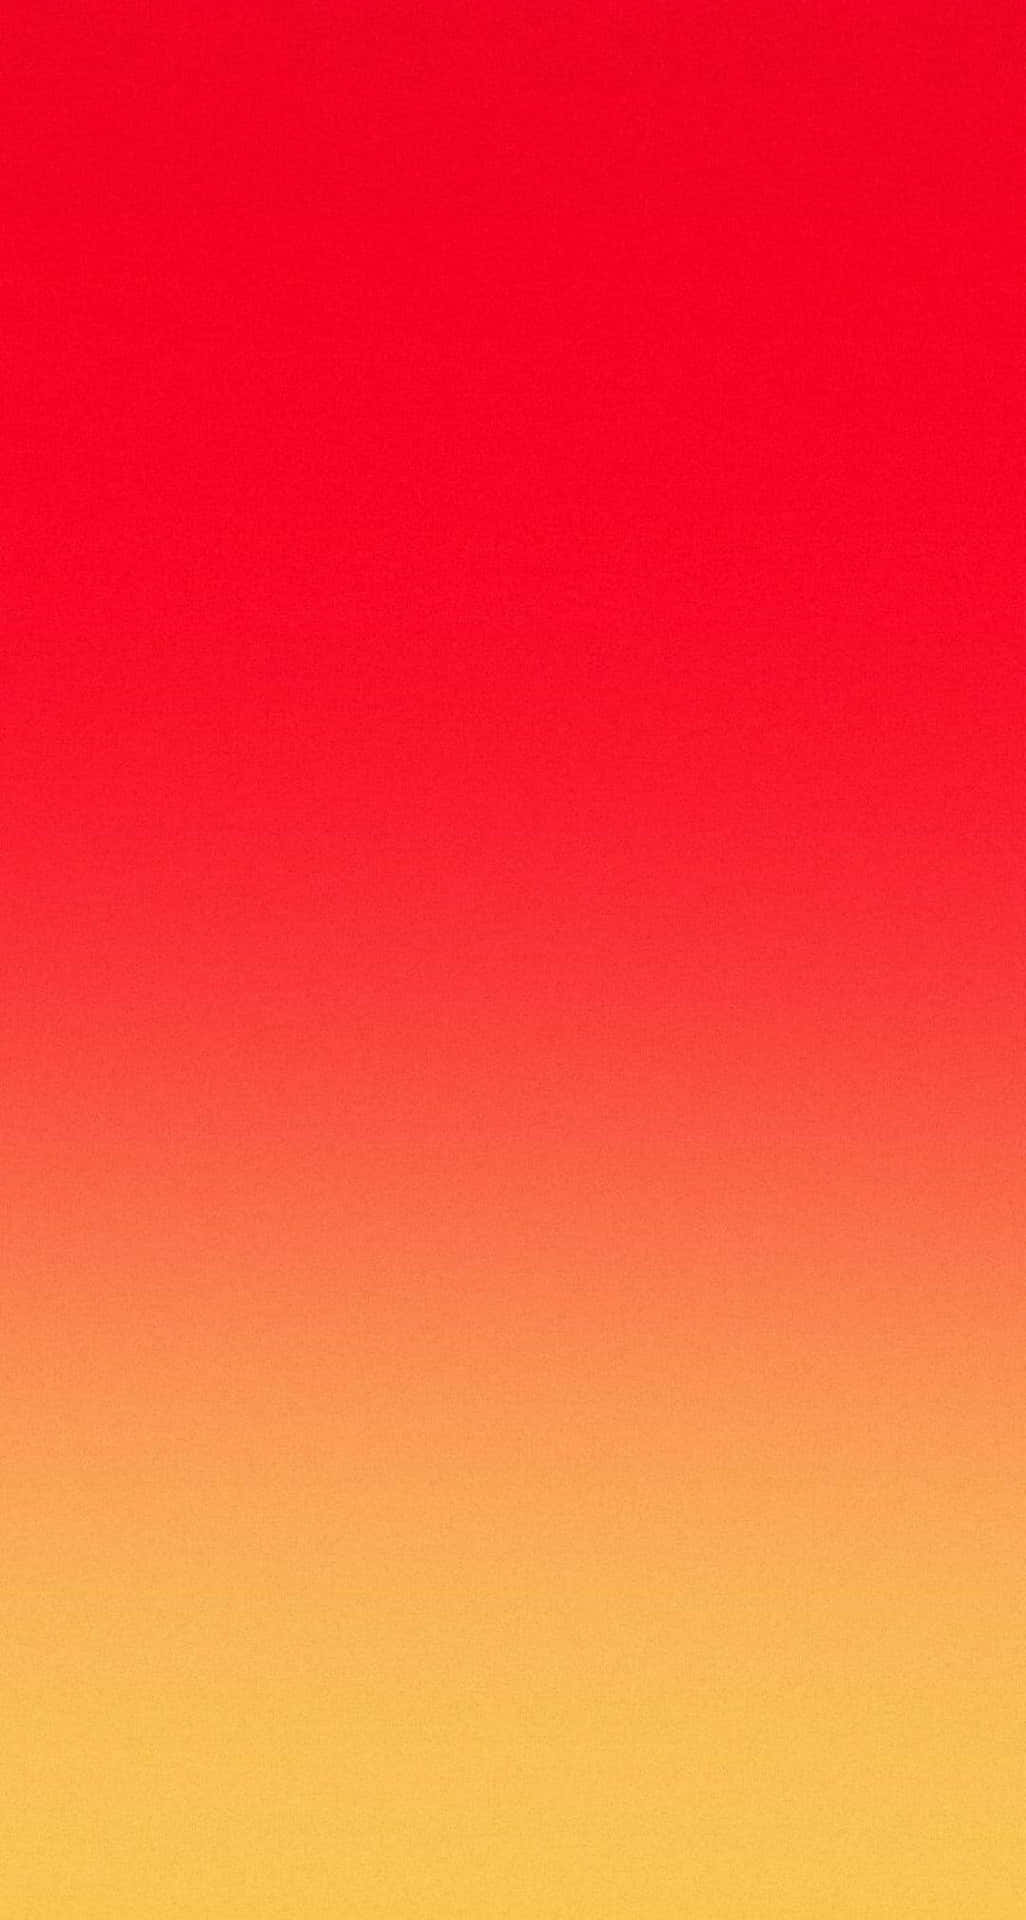 Red And Orange Pictures Wallpaper